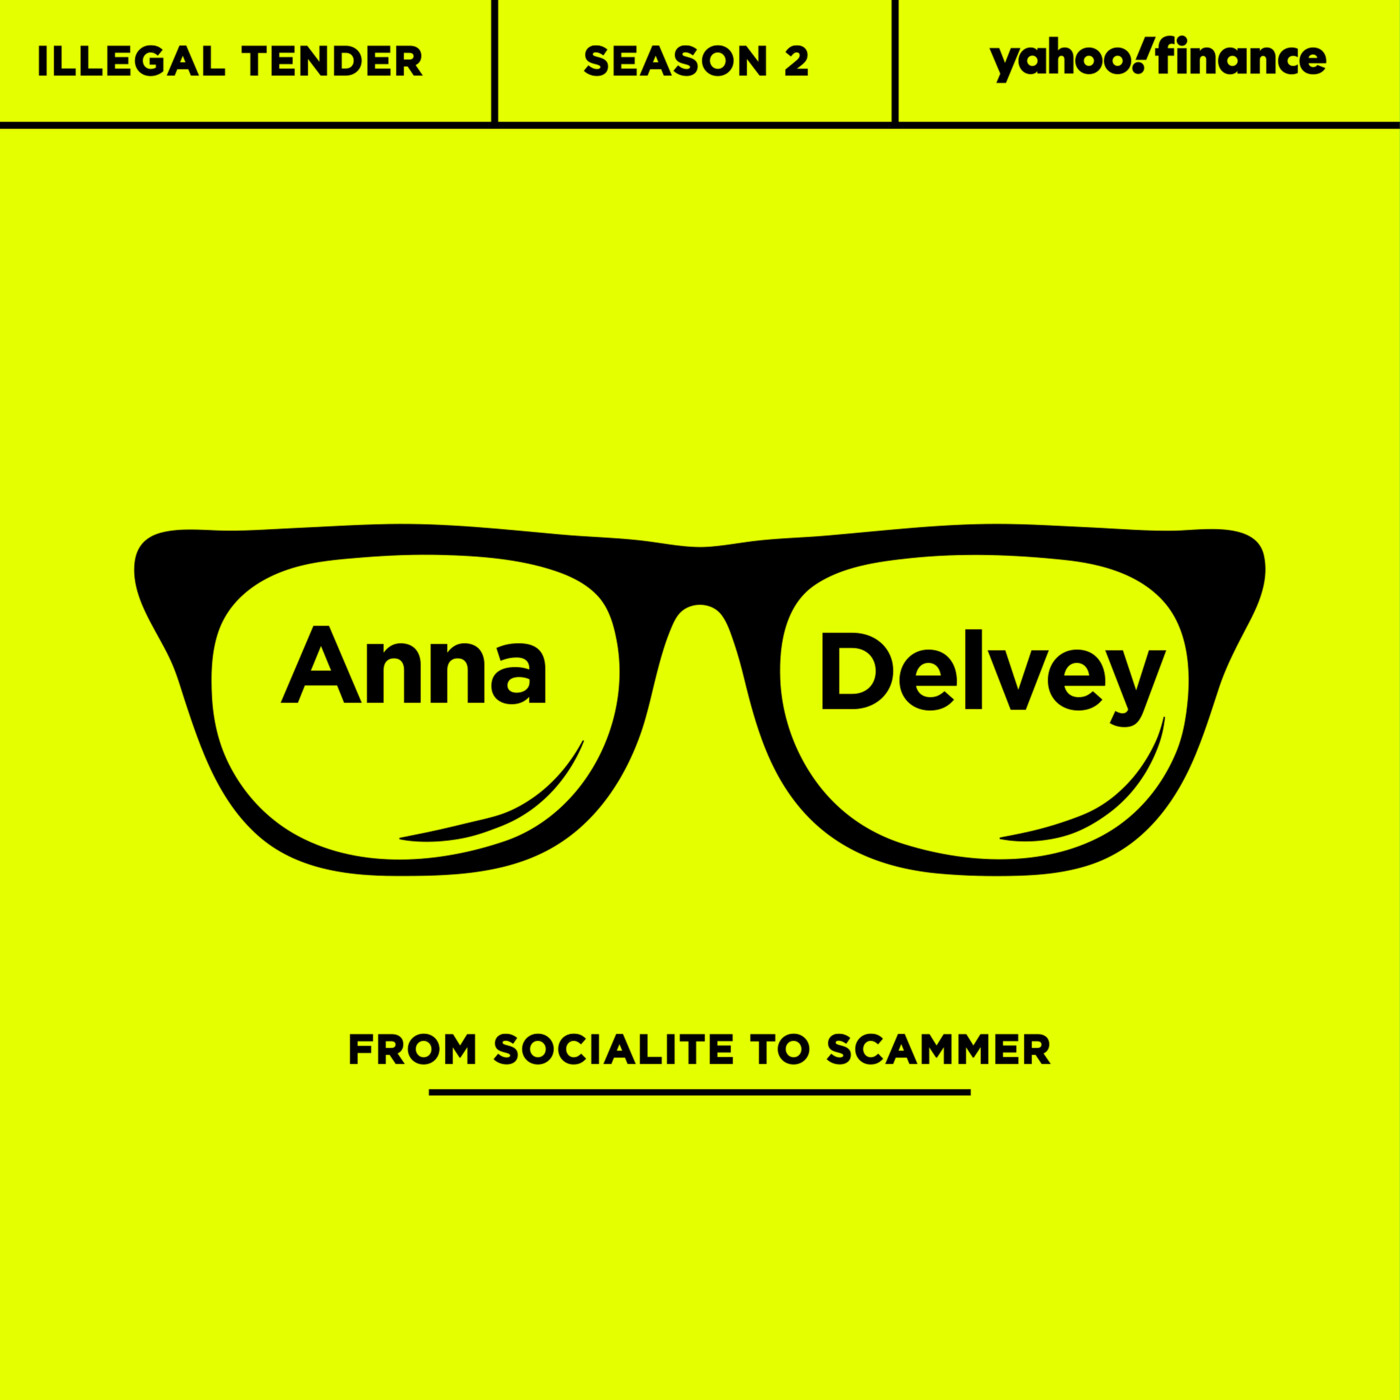 Socialite to scammer: Anna Delvey (Illegal Tender S.2)